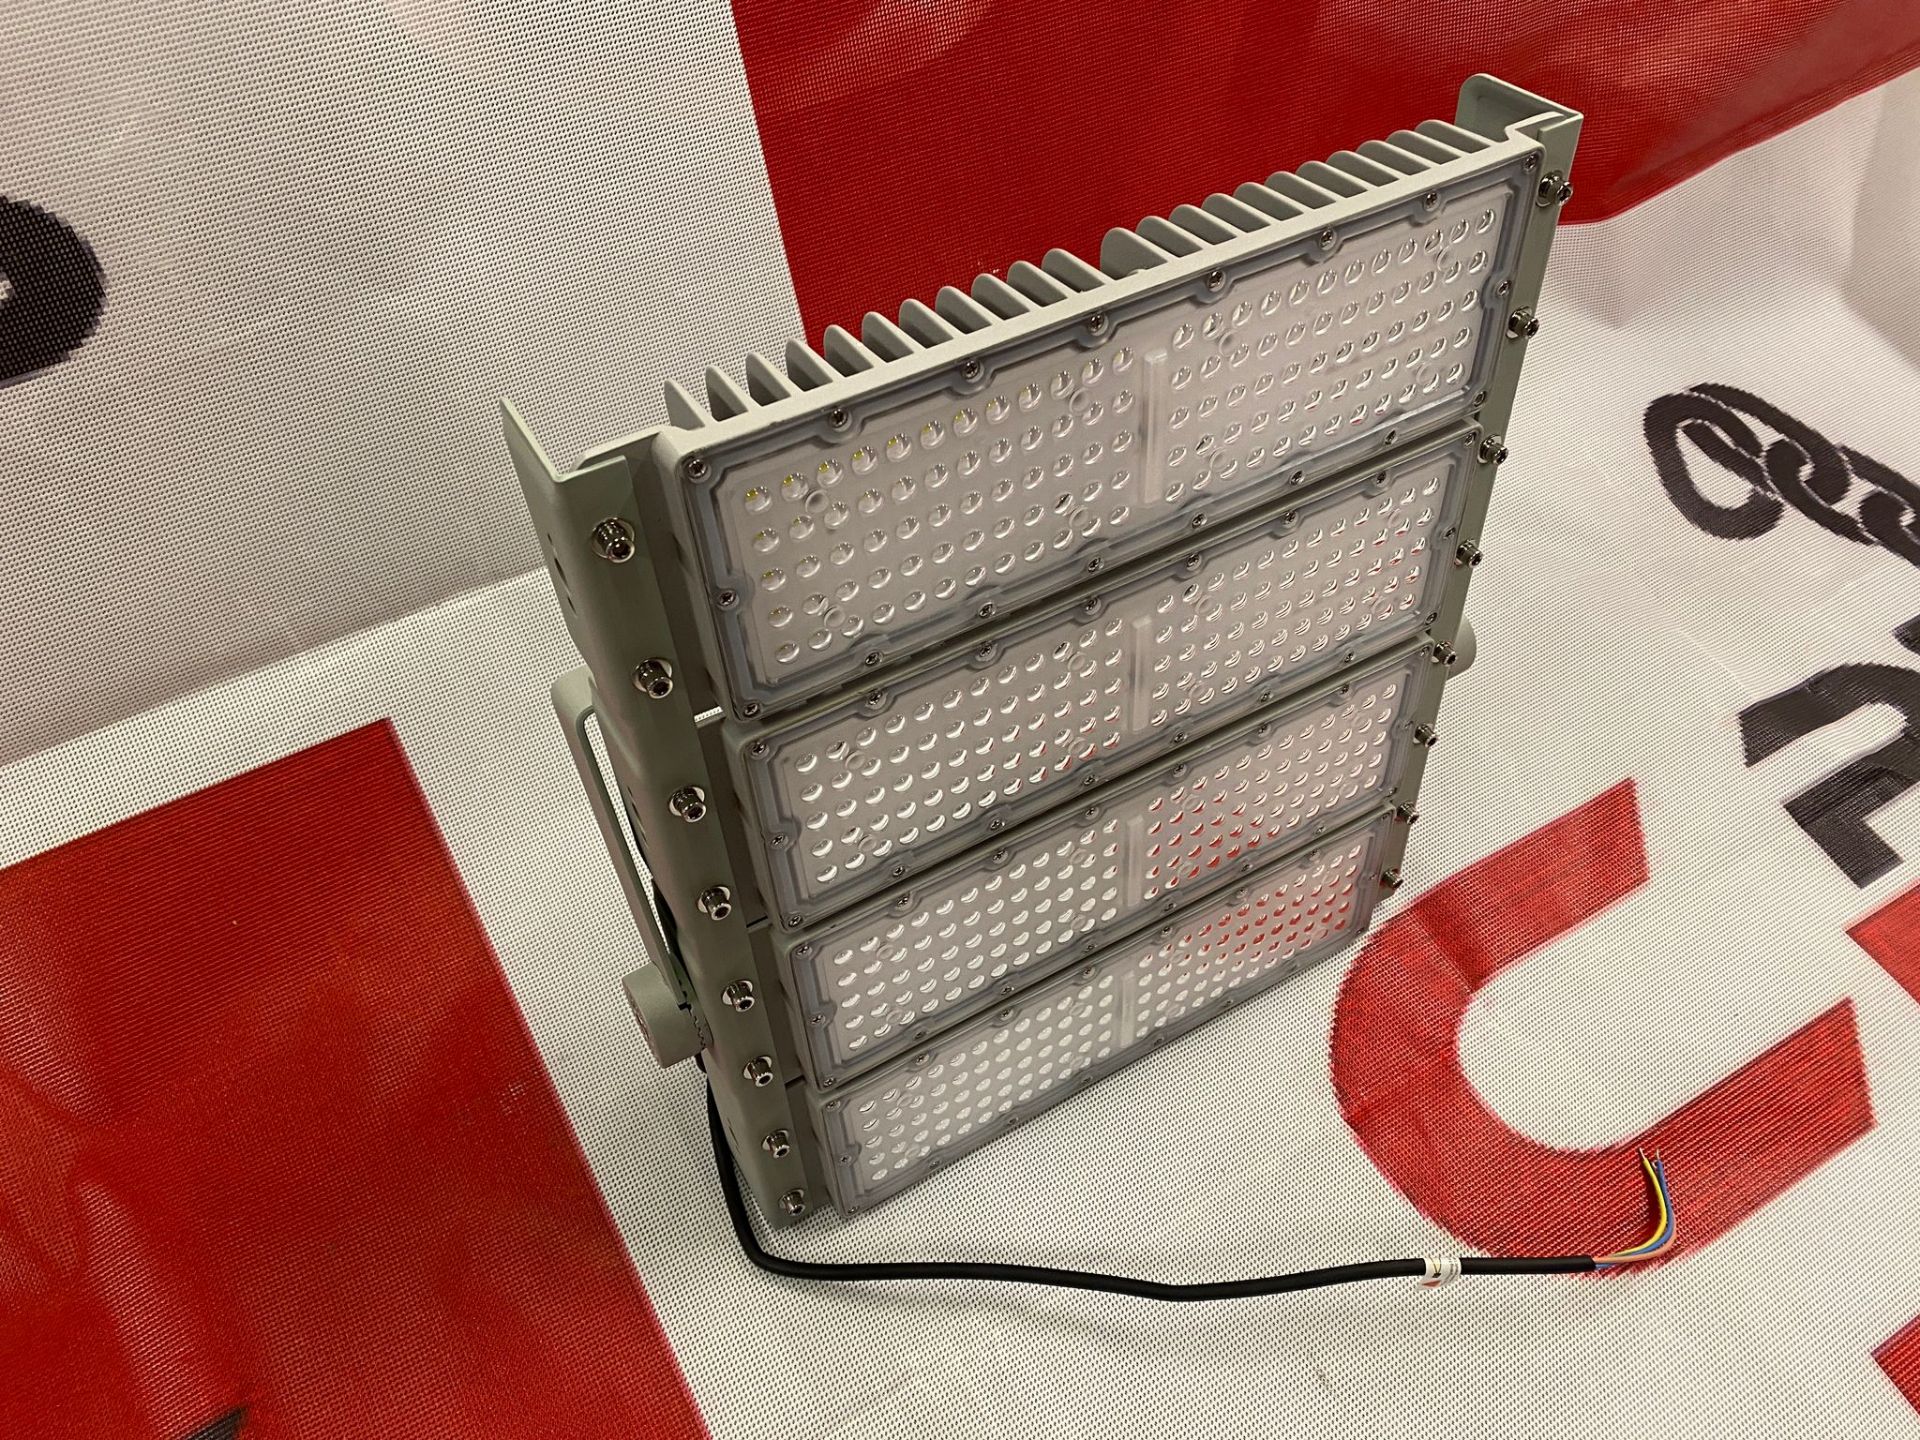 3 x LED400 Watt Flood Light Panel - For Car Parks, Security, Playing fields, Football pitches etc - Image 8 of 8